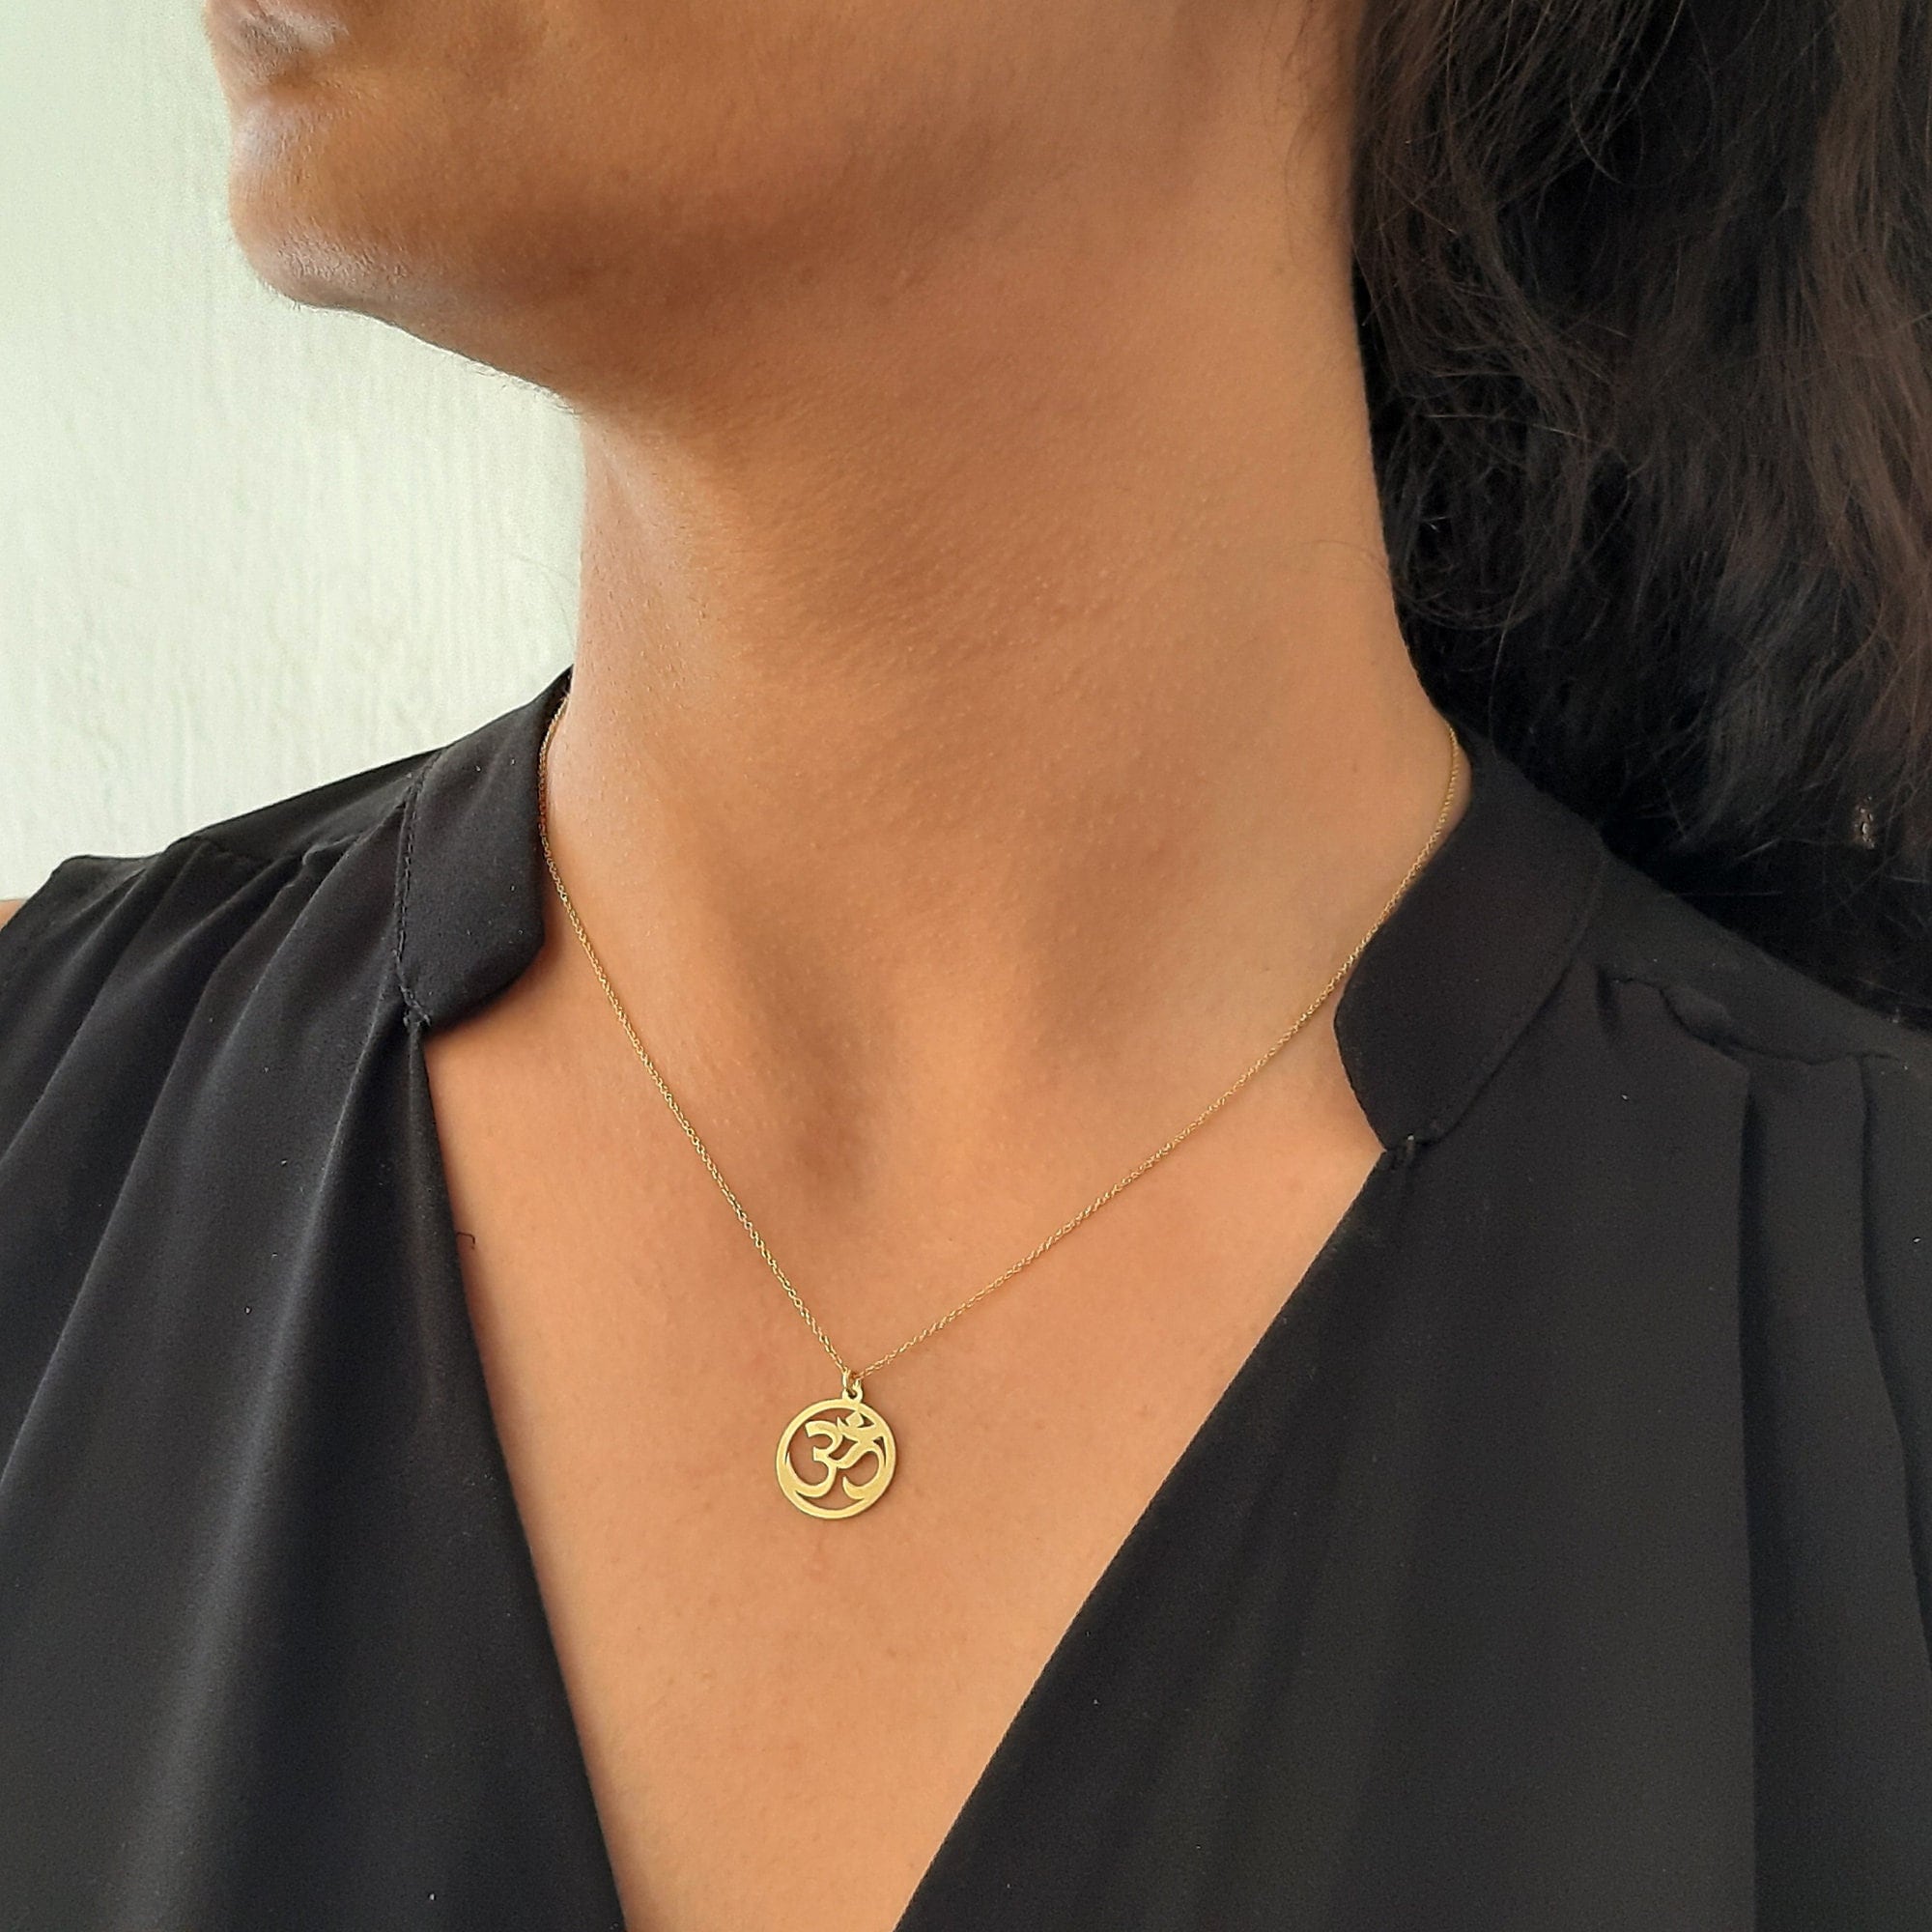 Dainty 14K Solid Gold Om Necklace, Personalized Yoga Necklace, Gold Ohm Necklace for Women , Custom 14K Aum Solid Gold Pendant for Layered